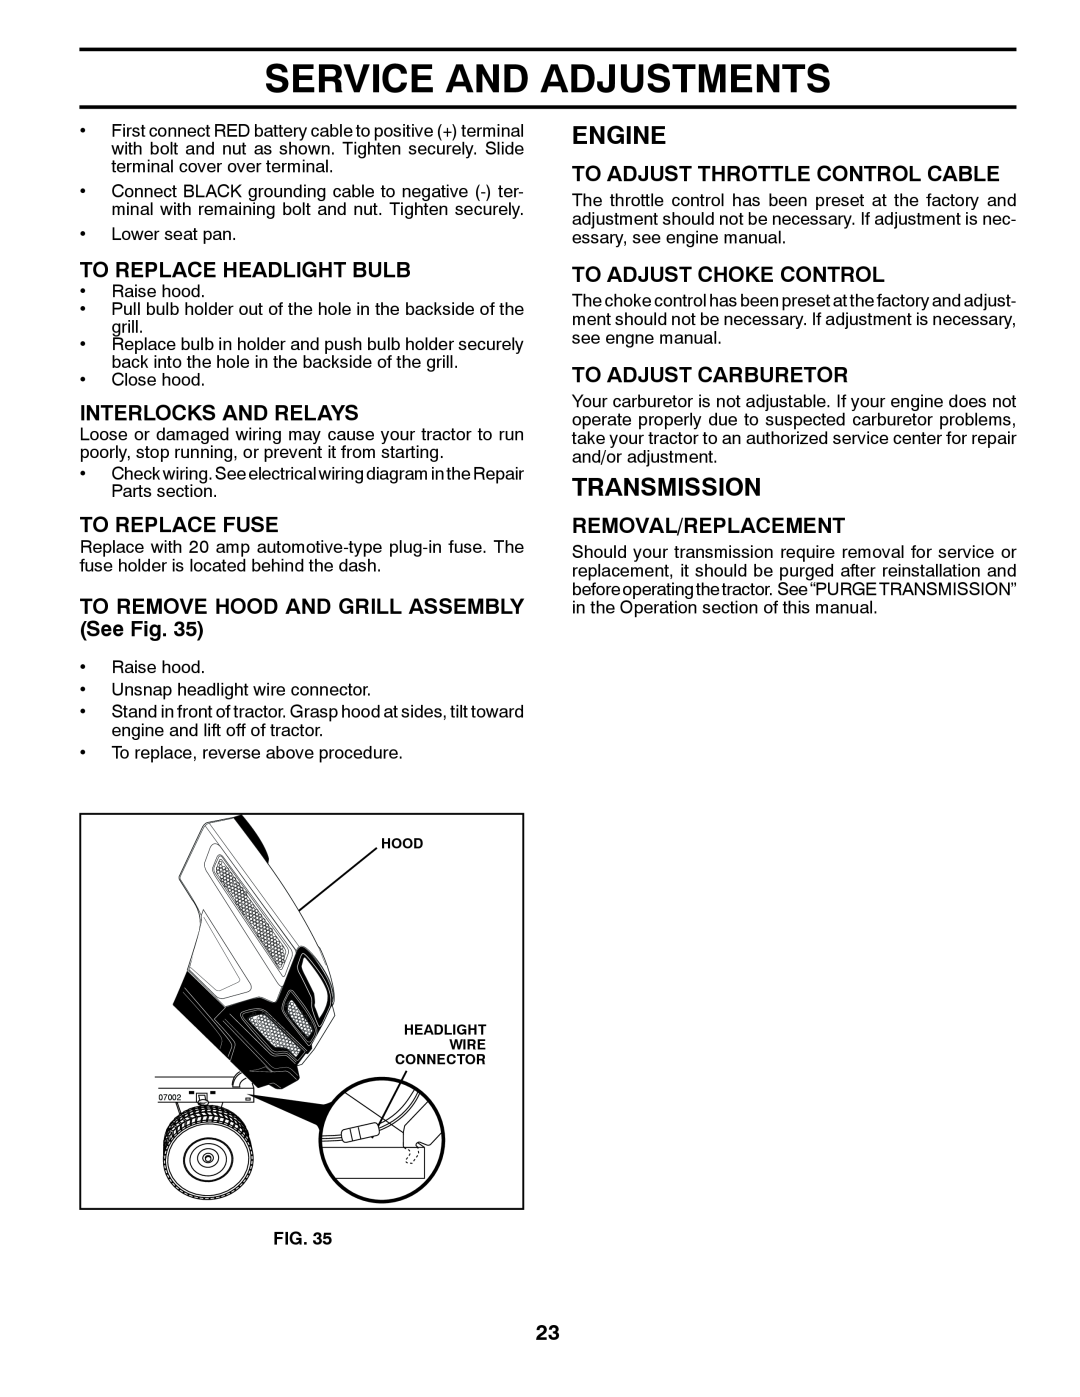 Husqvarna 532 43 95-58 owner manual Transmission, To Replace Headlight Bulb, Interlocks And Relays, To Replace Fuse, Engine 